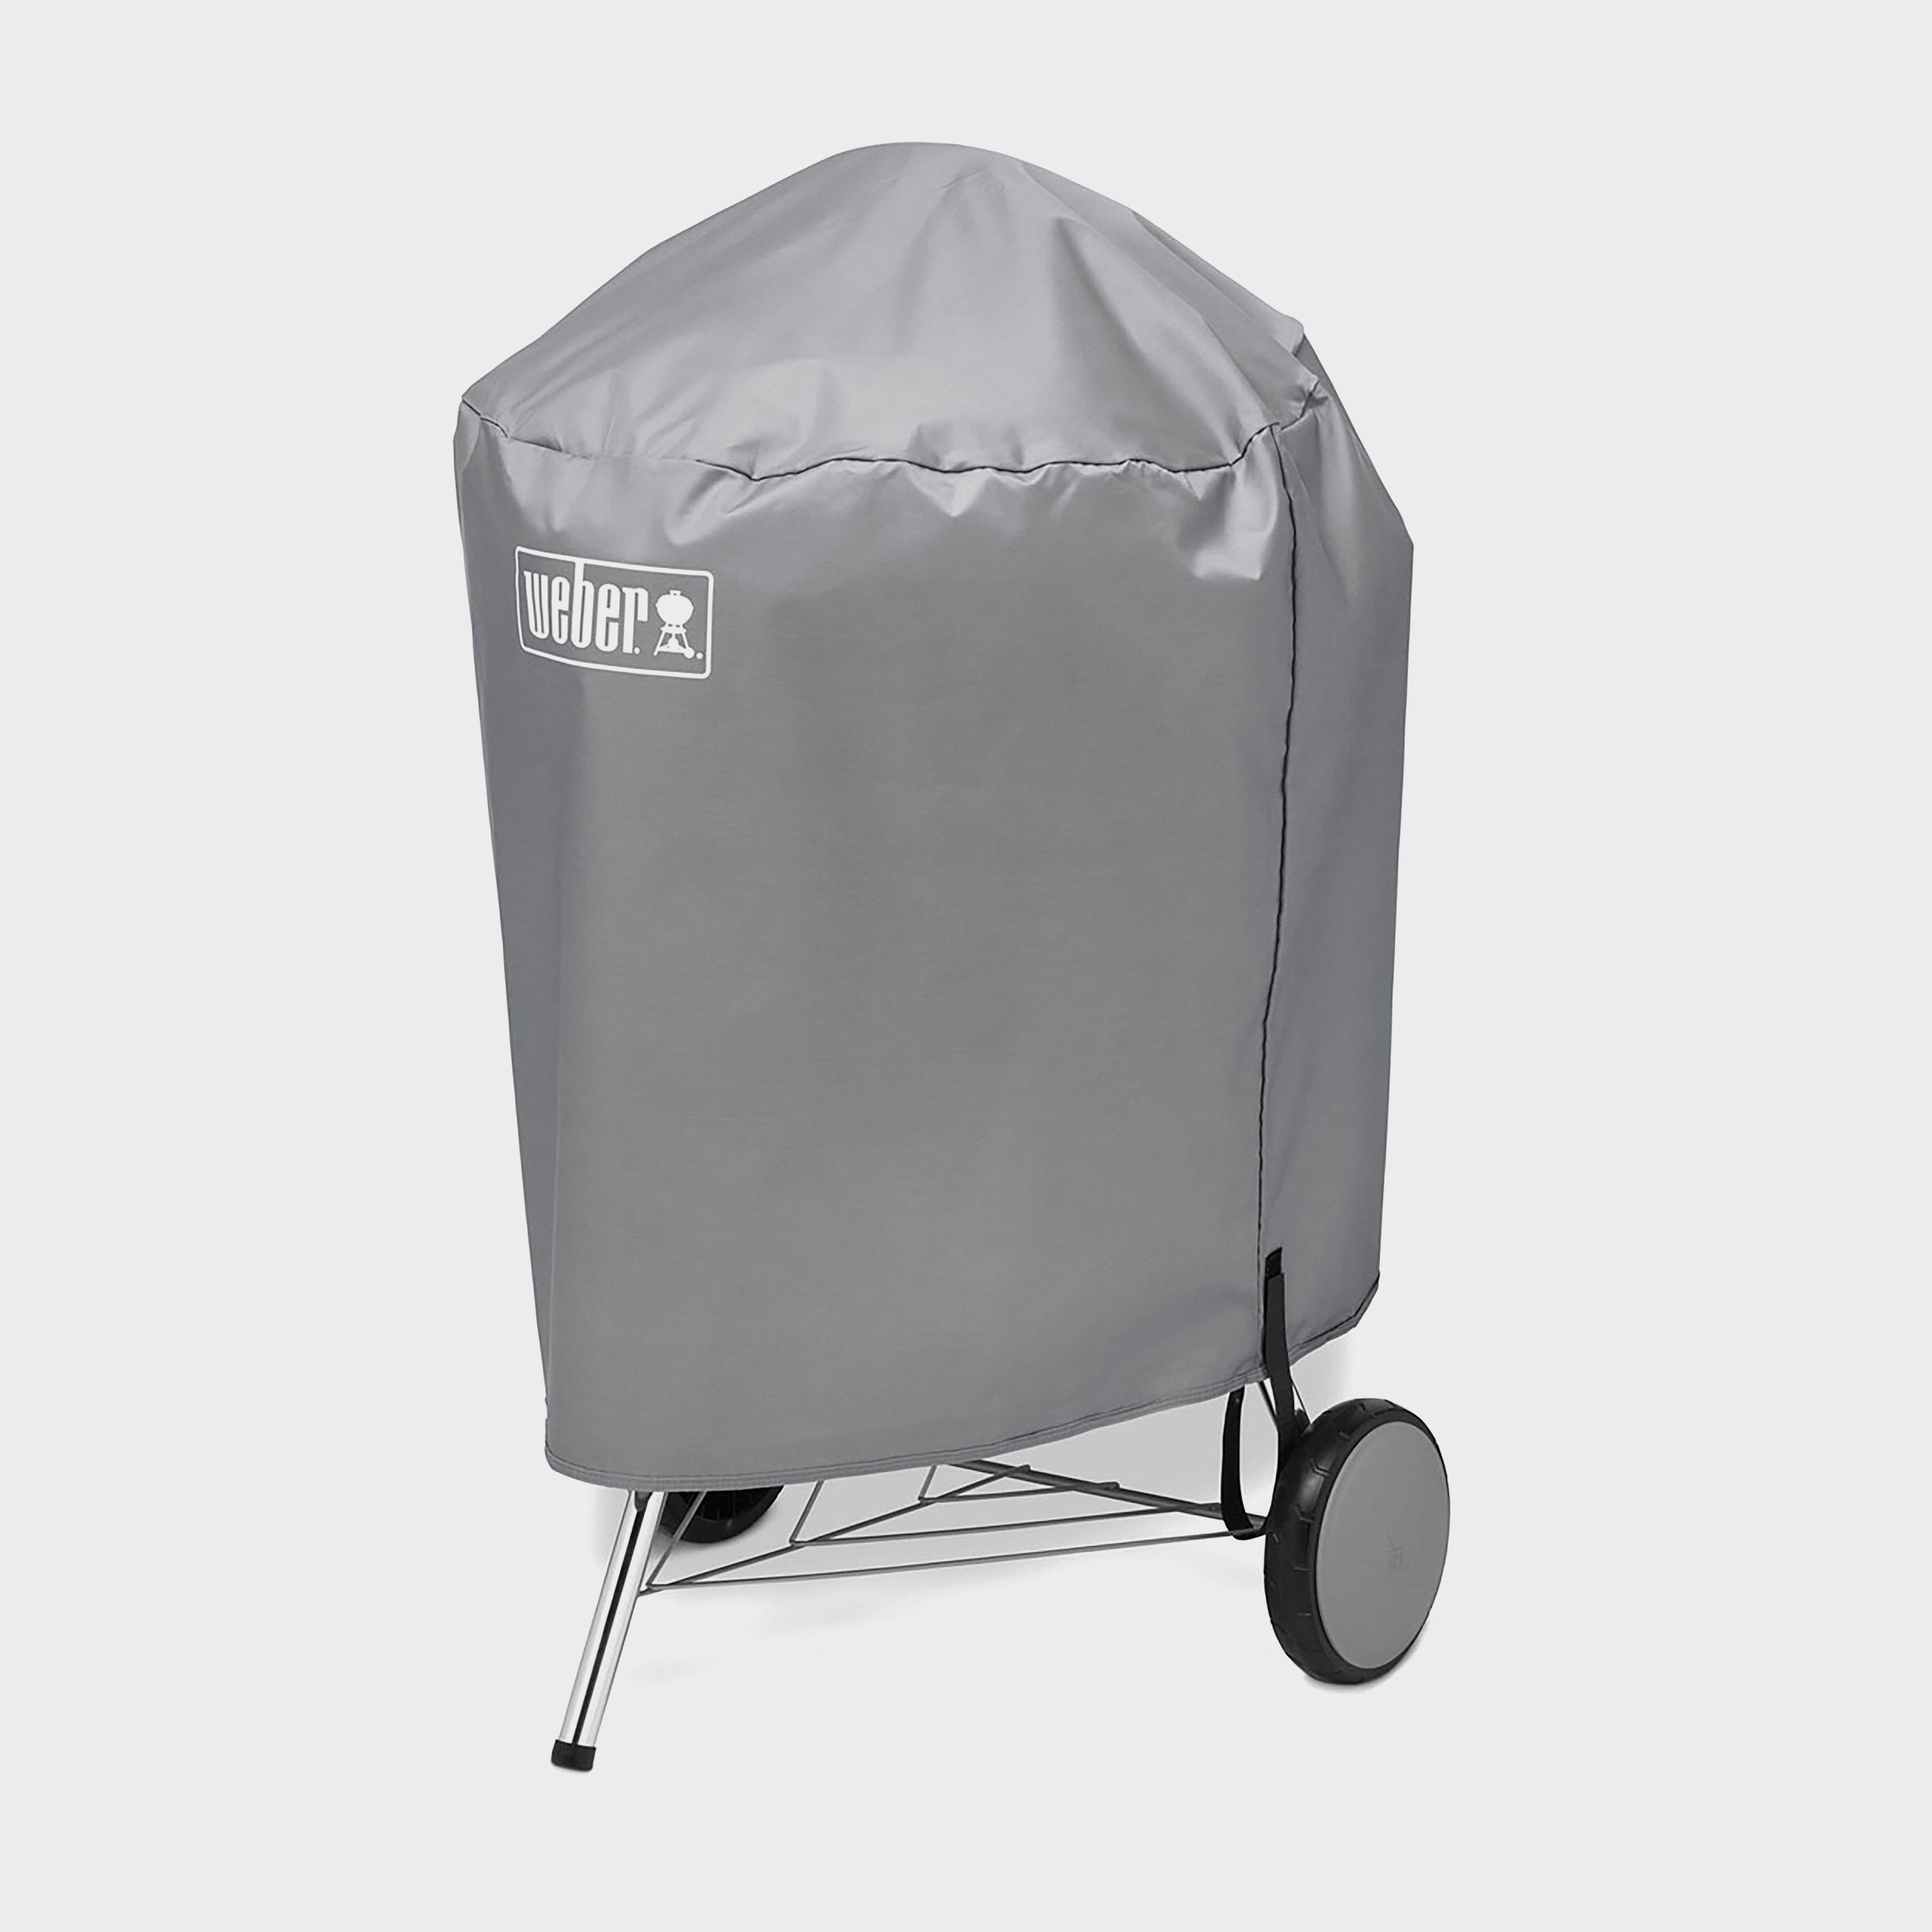 Weber Value Charcoal Grill Cover - Gray, 22"